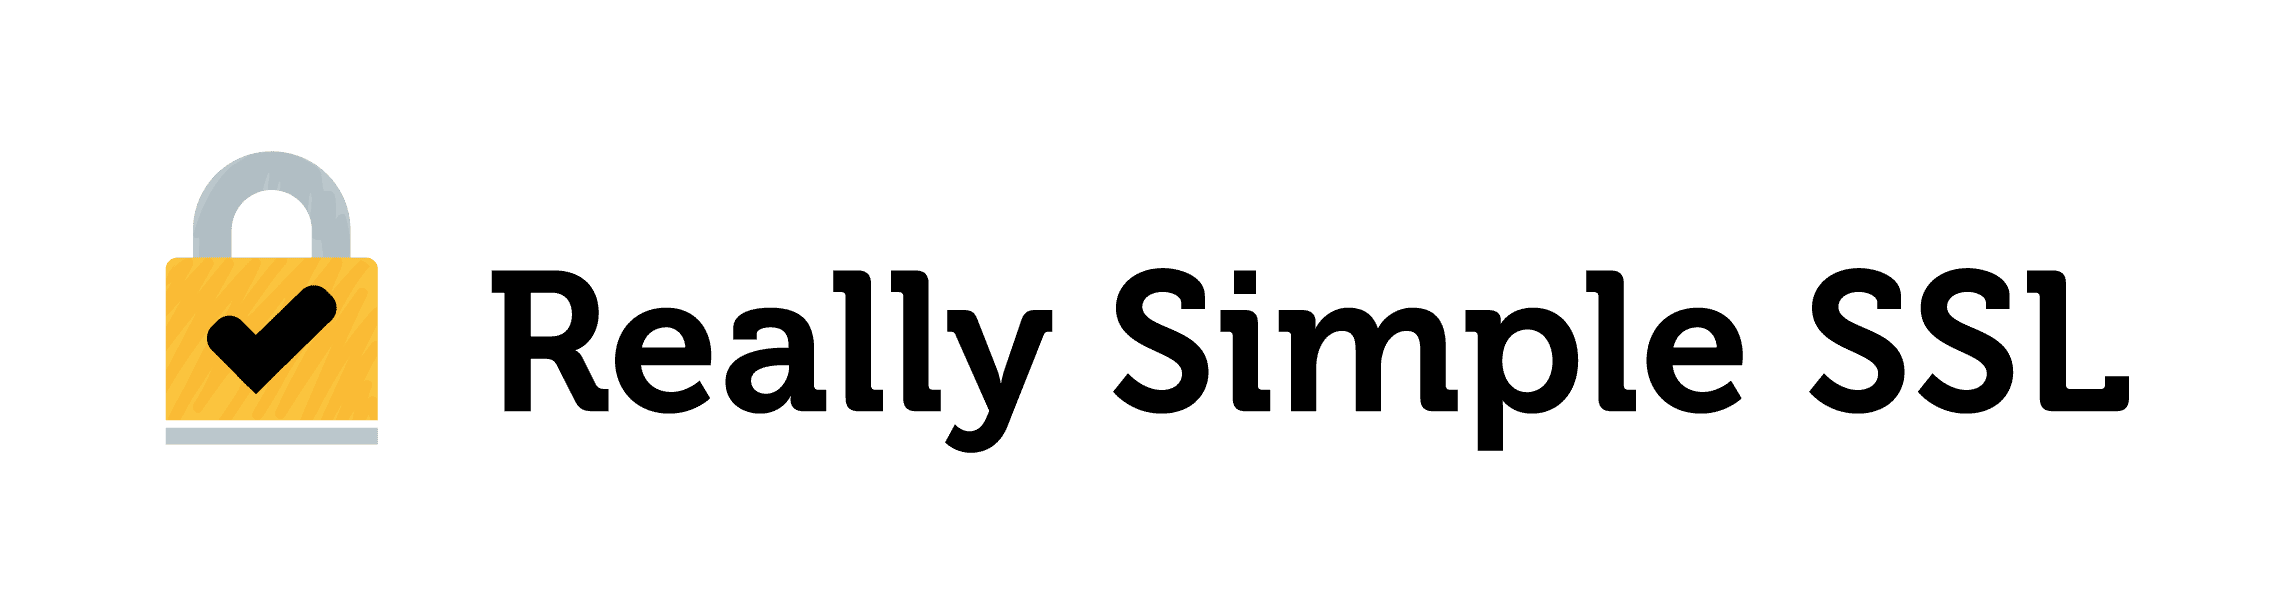 https://really-simple-ssl.com/wp-content/uploads/2022/09/Really-Simple-SSL-Logo-04.png